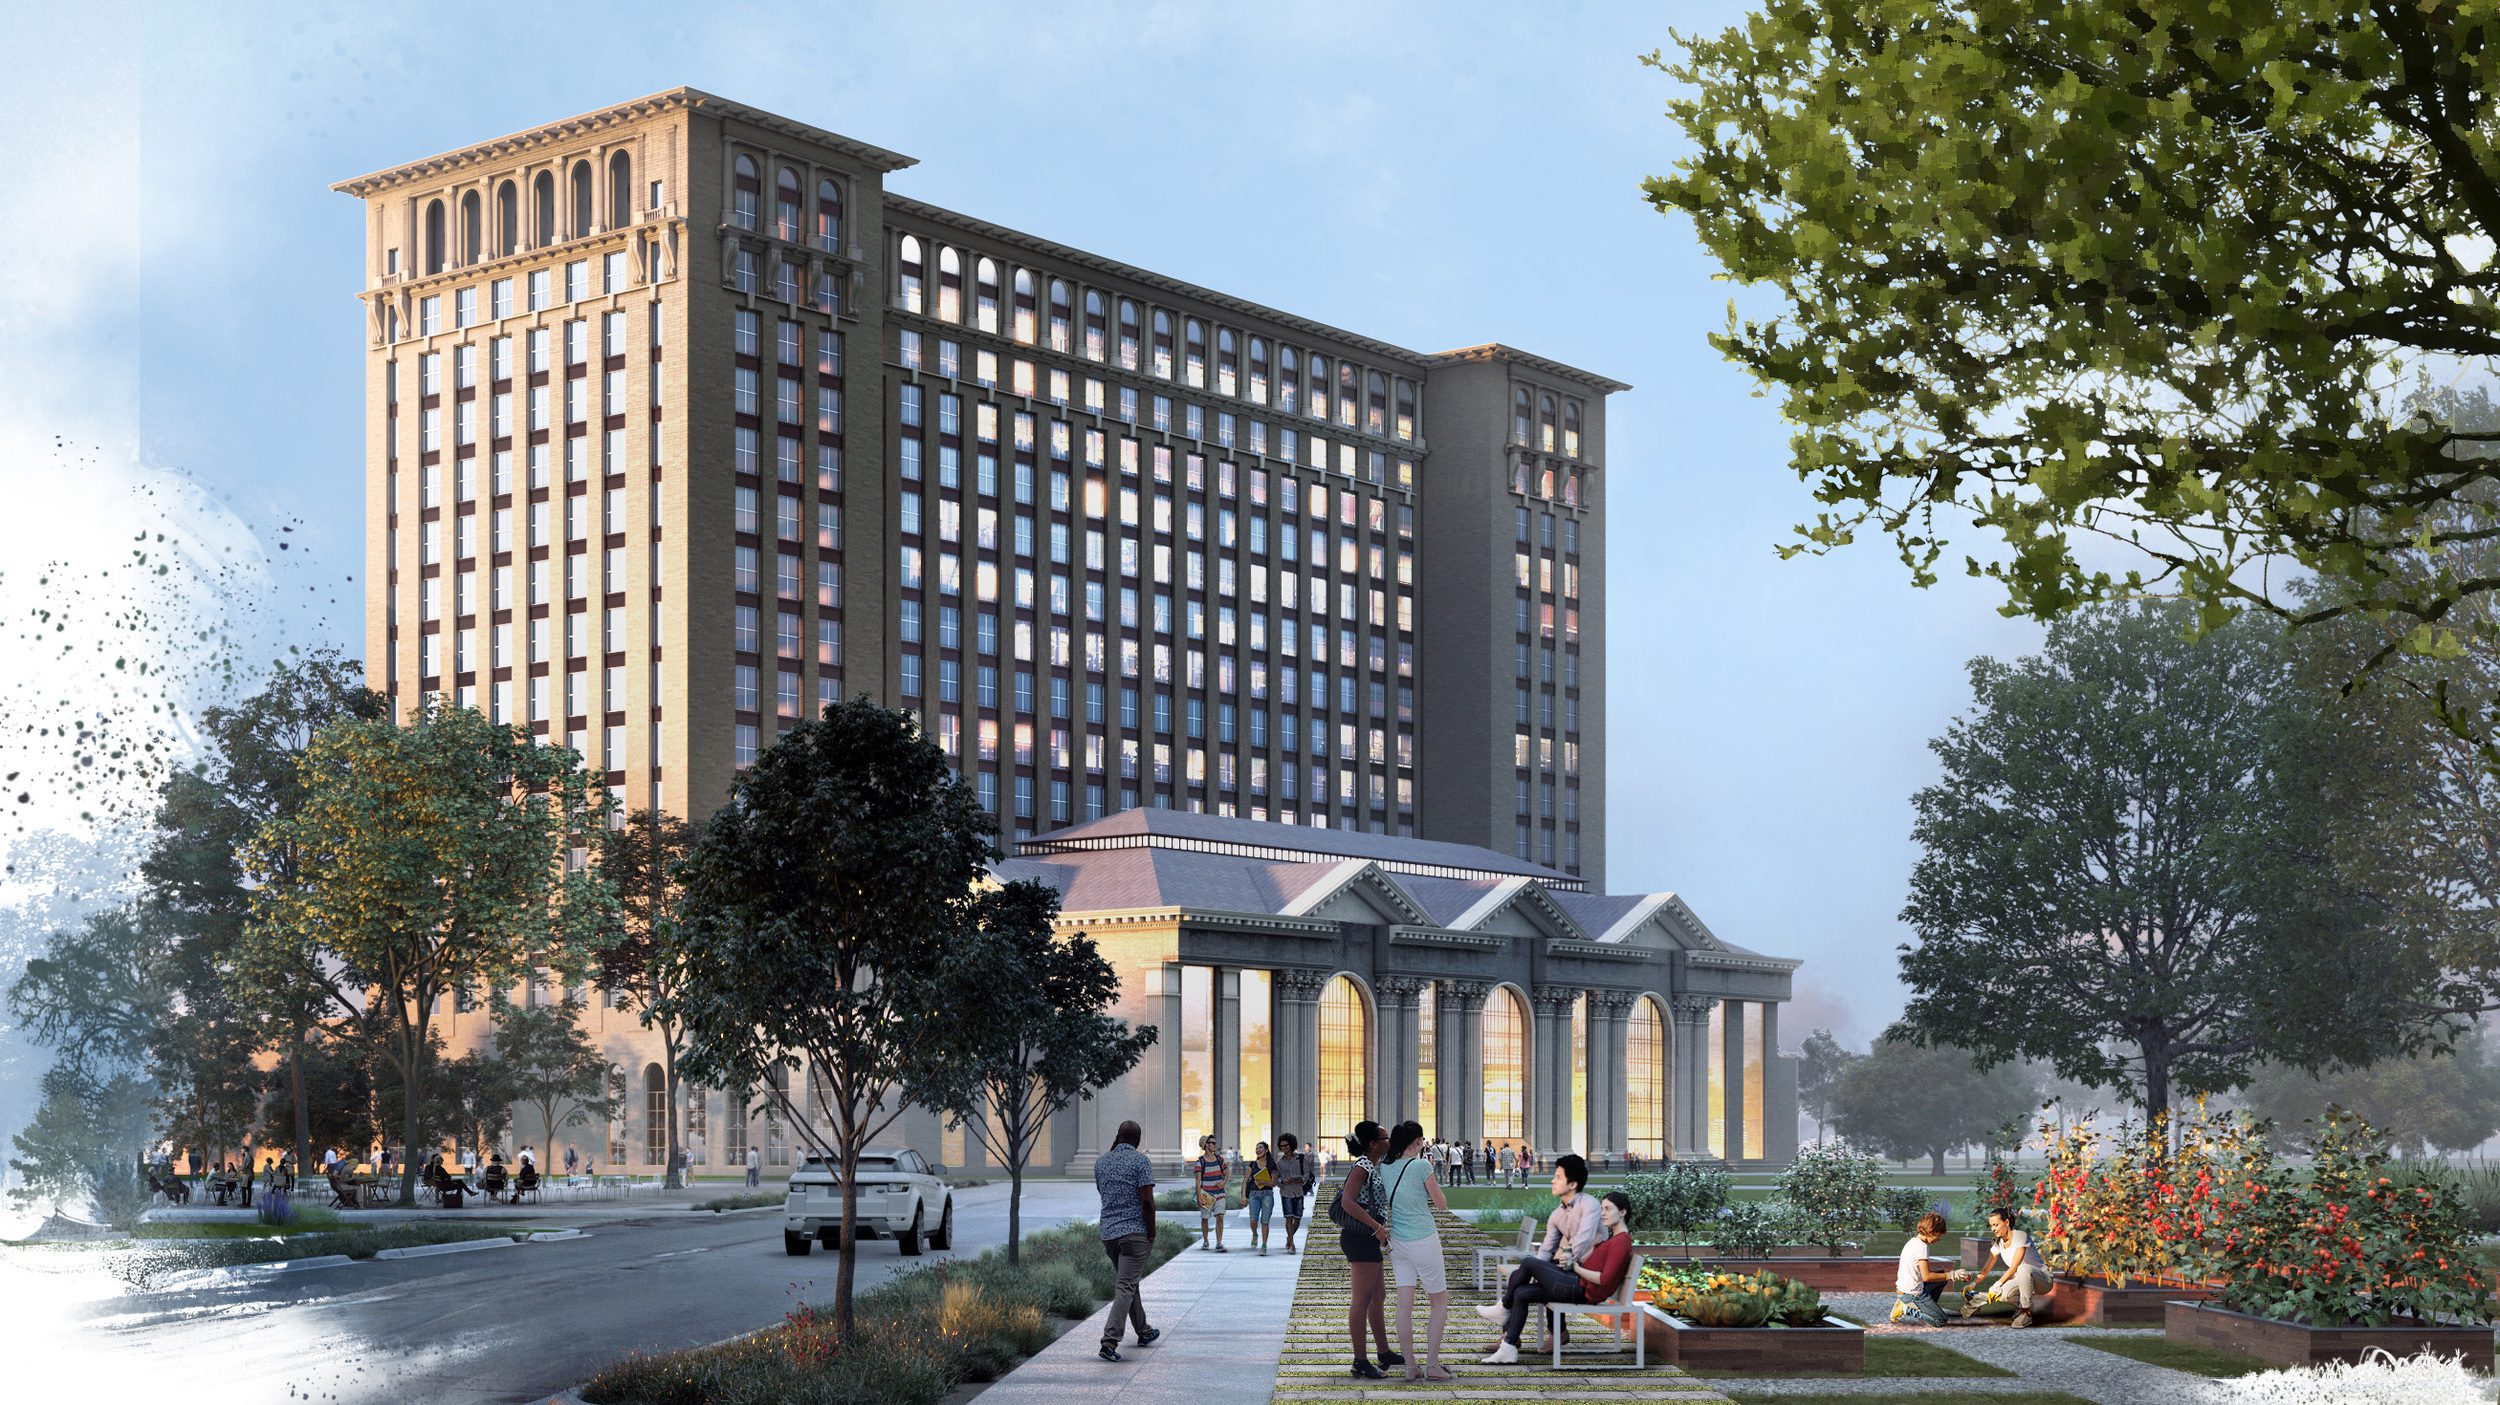 Michigan Central Station exterior rendering